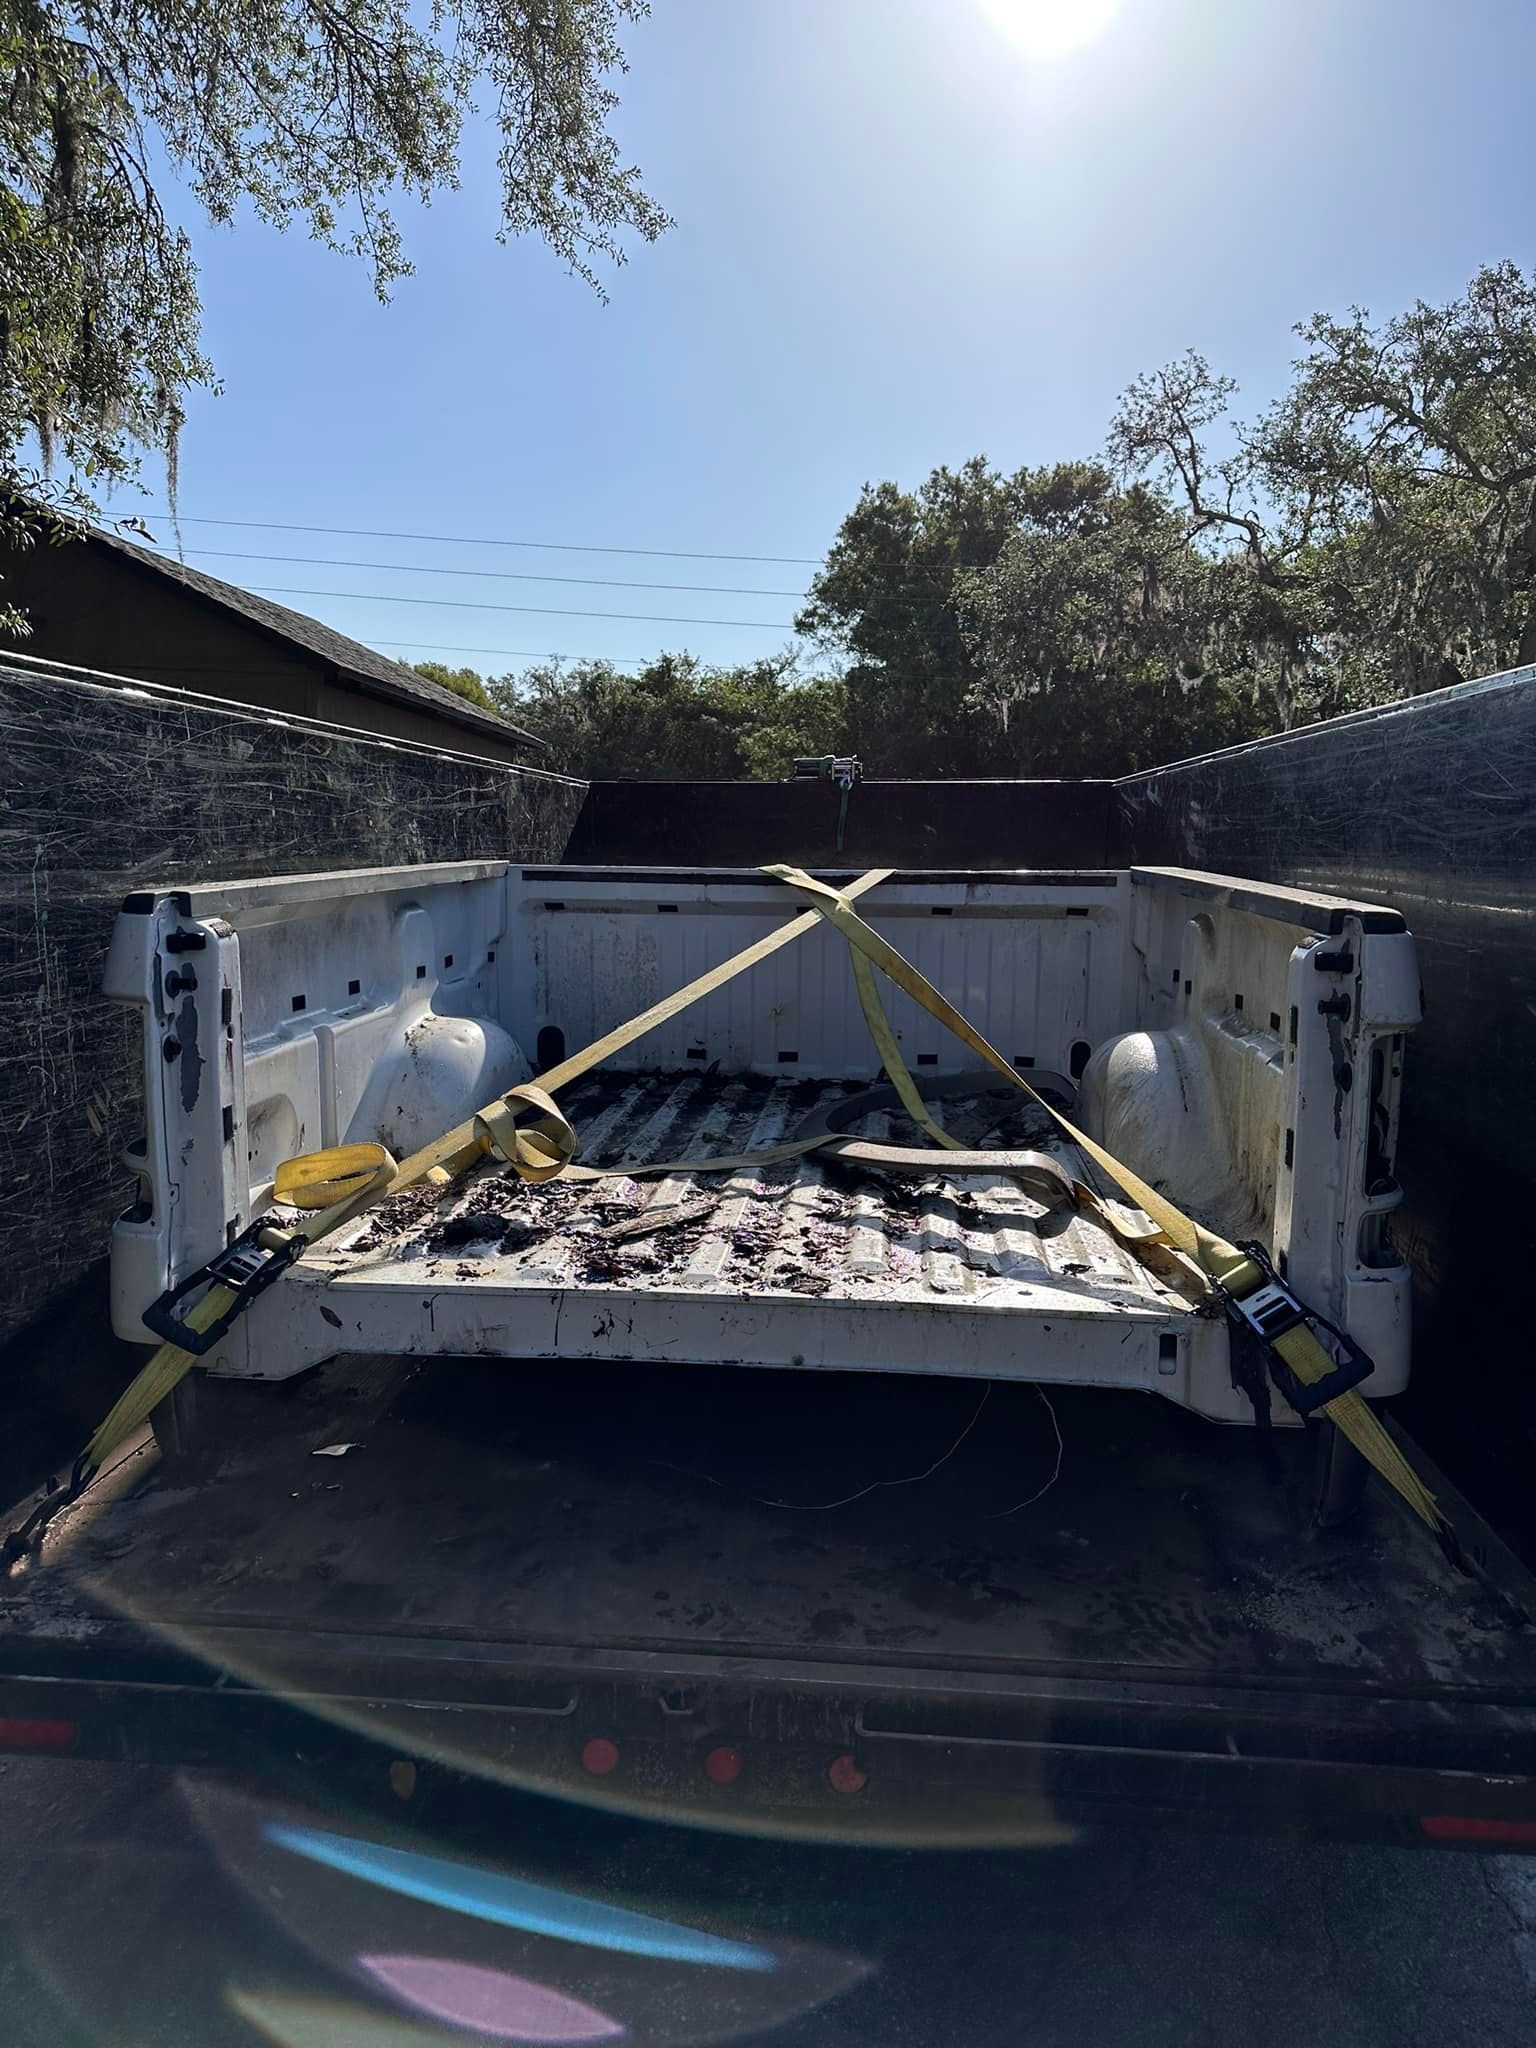 Removing a truck bed and disposing of it